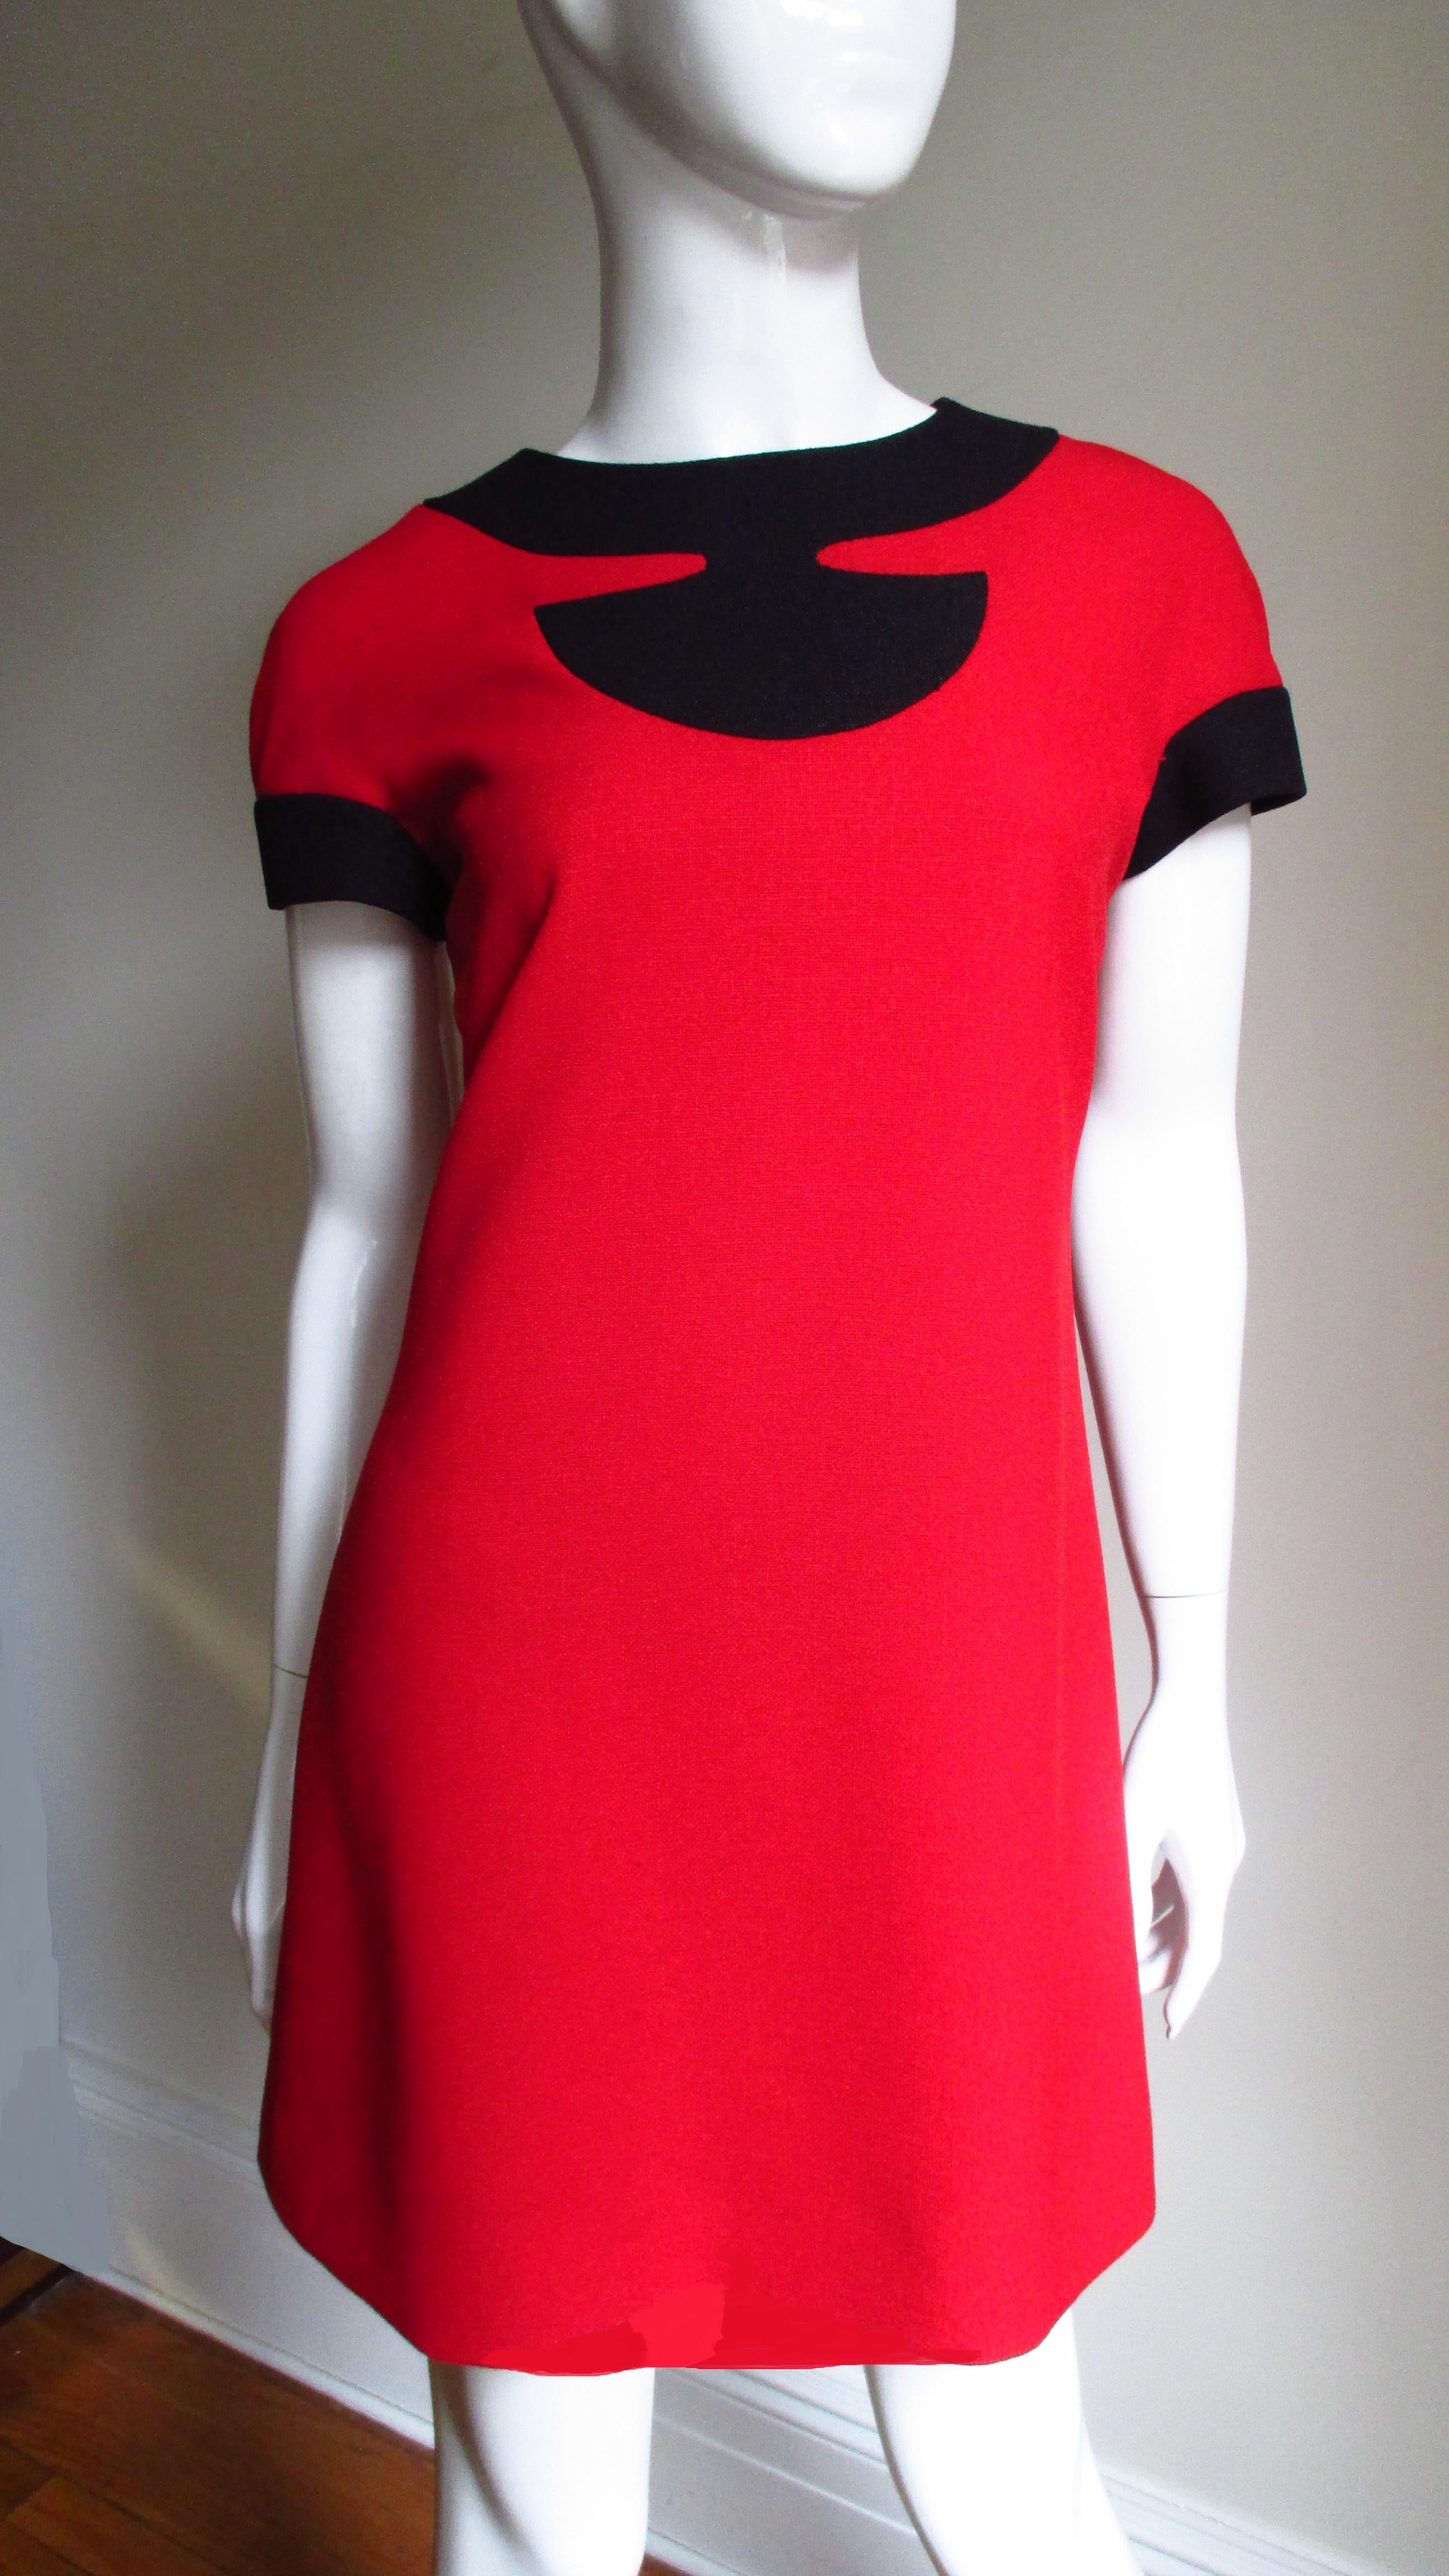 A fabulous much documented in the 1960s red and black dress from the master Pierre Cardin.  It has a crew neckline and short sleeves both with black trim.  It is fully lined in red and has a back zipper.
Fits sizes Small, Medium.

Bust 38